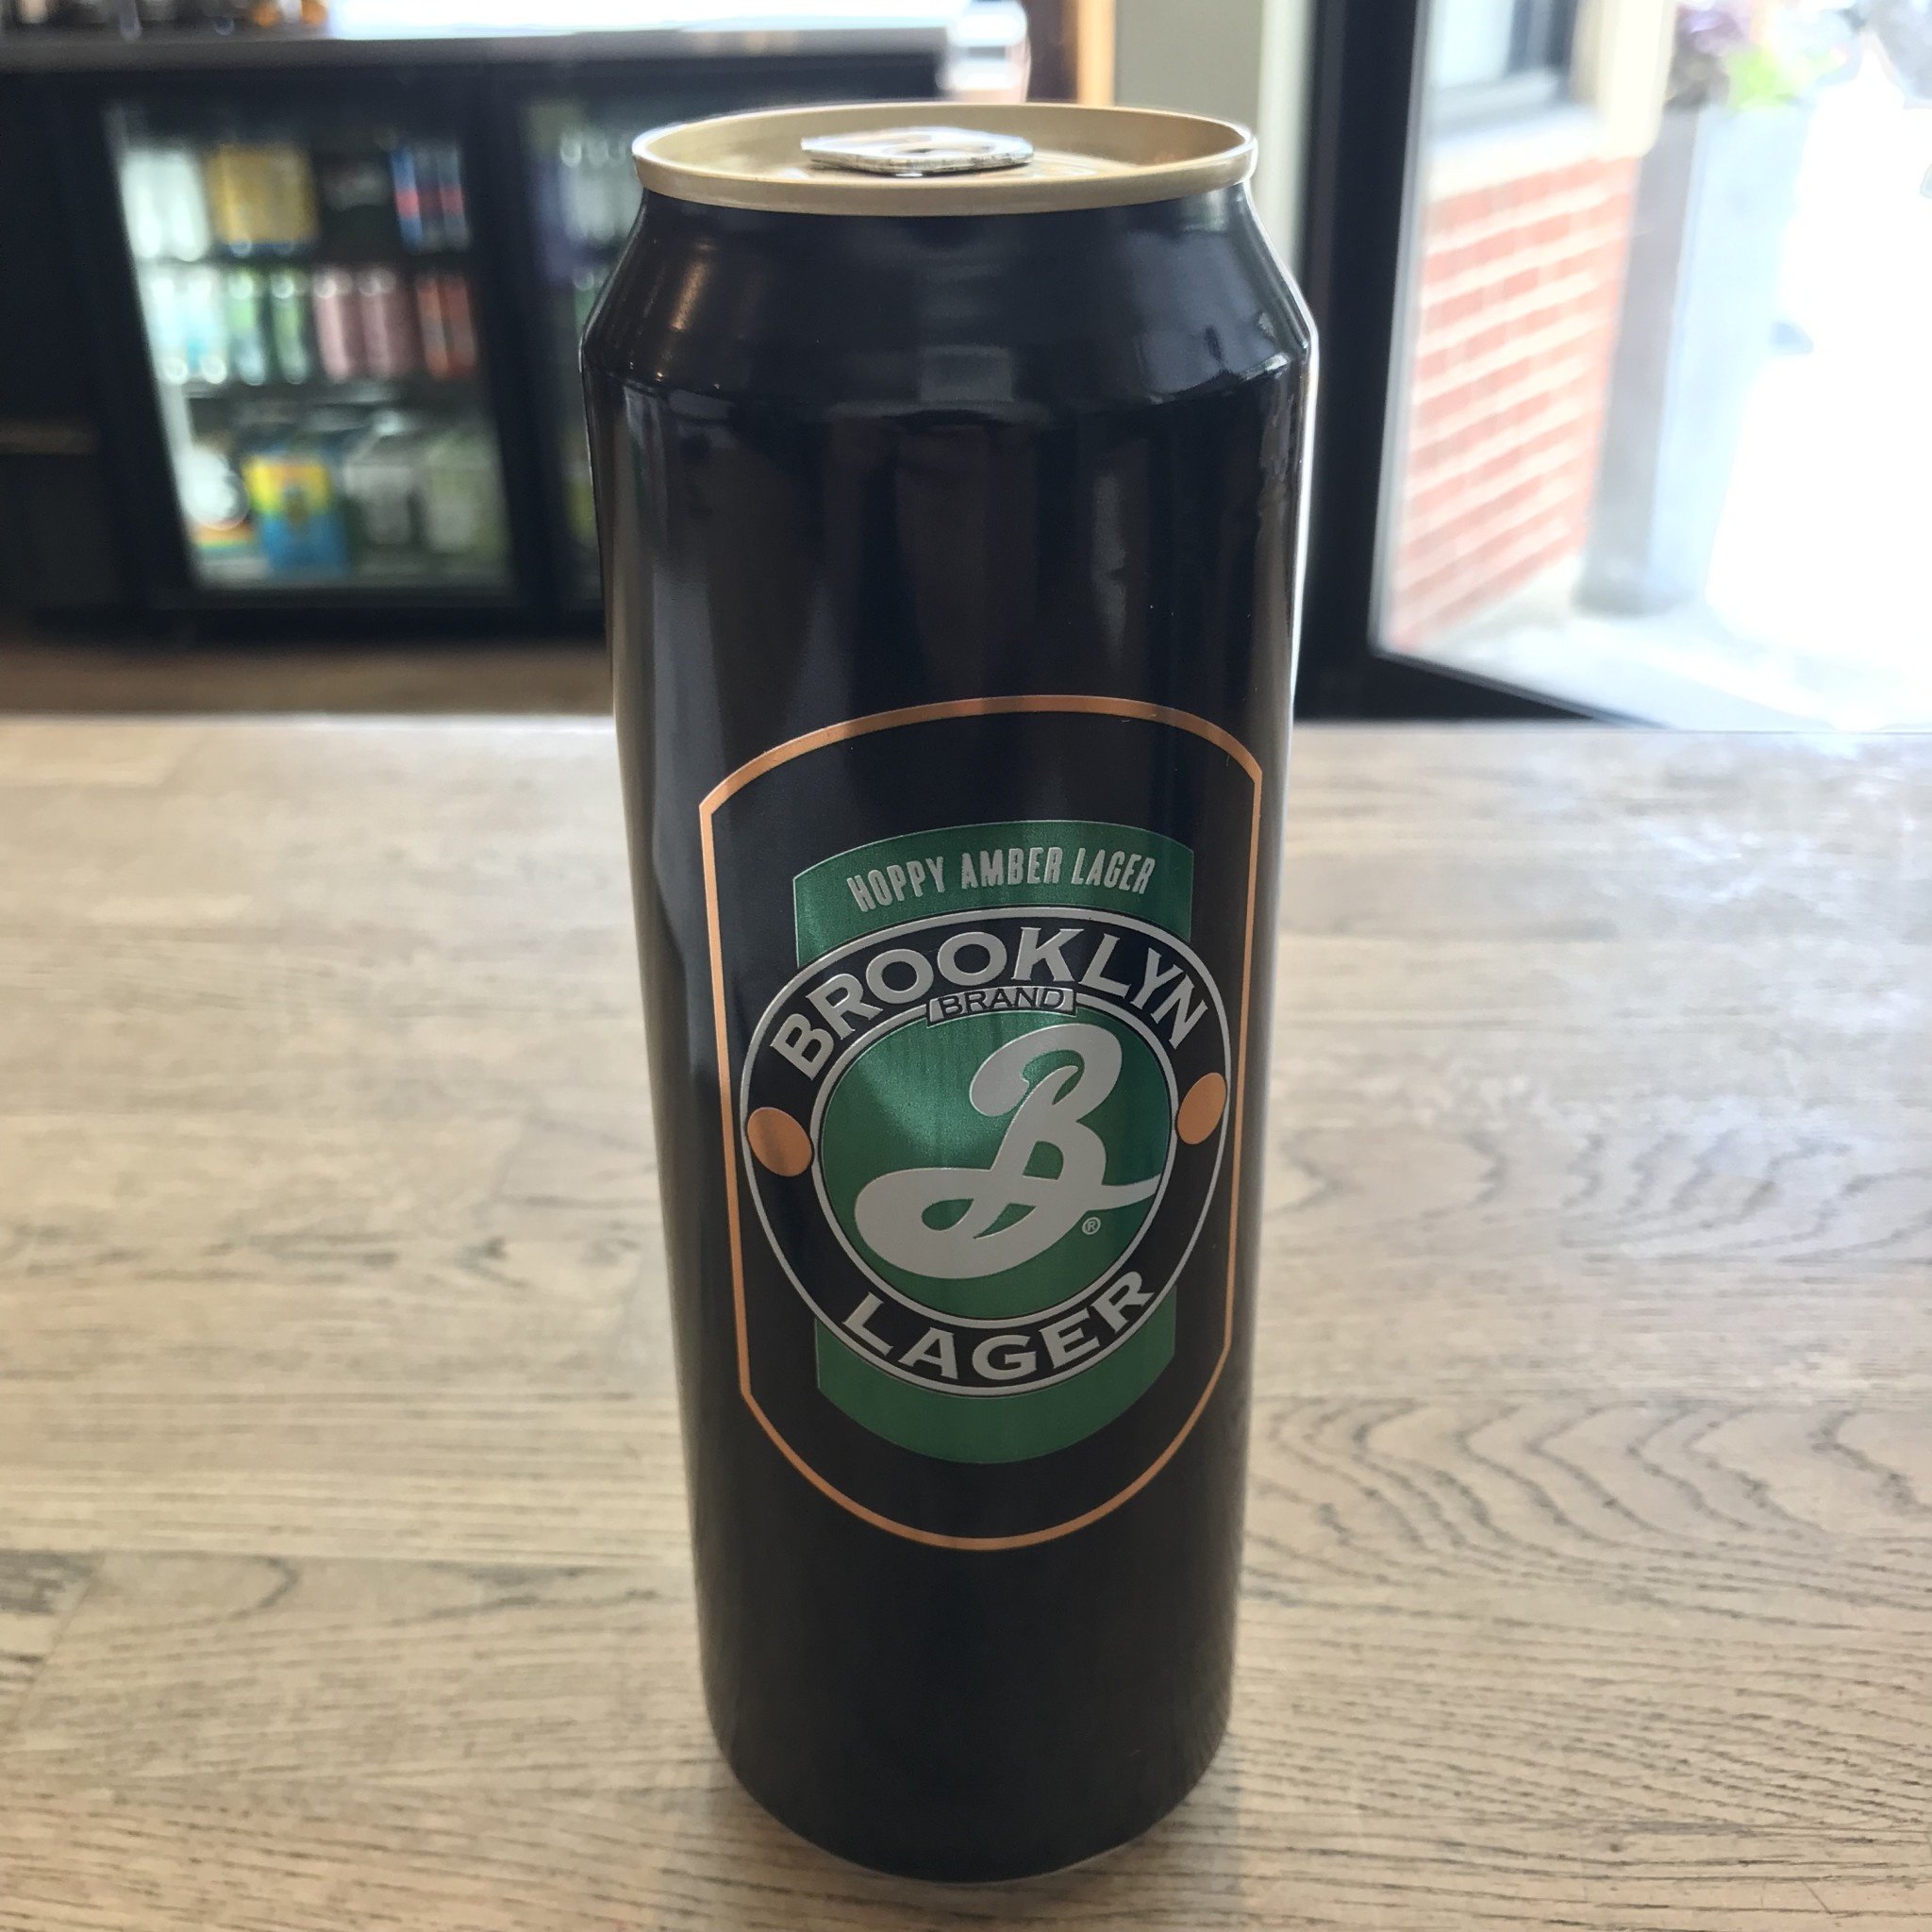 USA Brooklyn Lager 19.2oz can